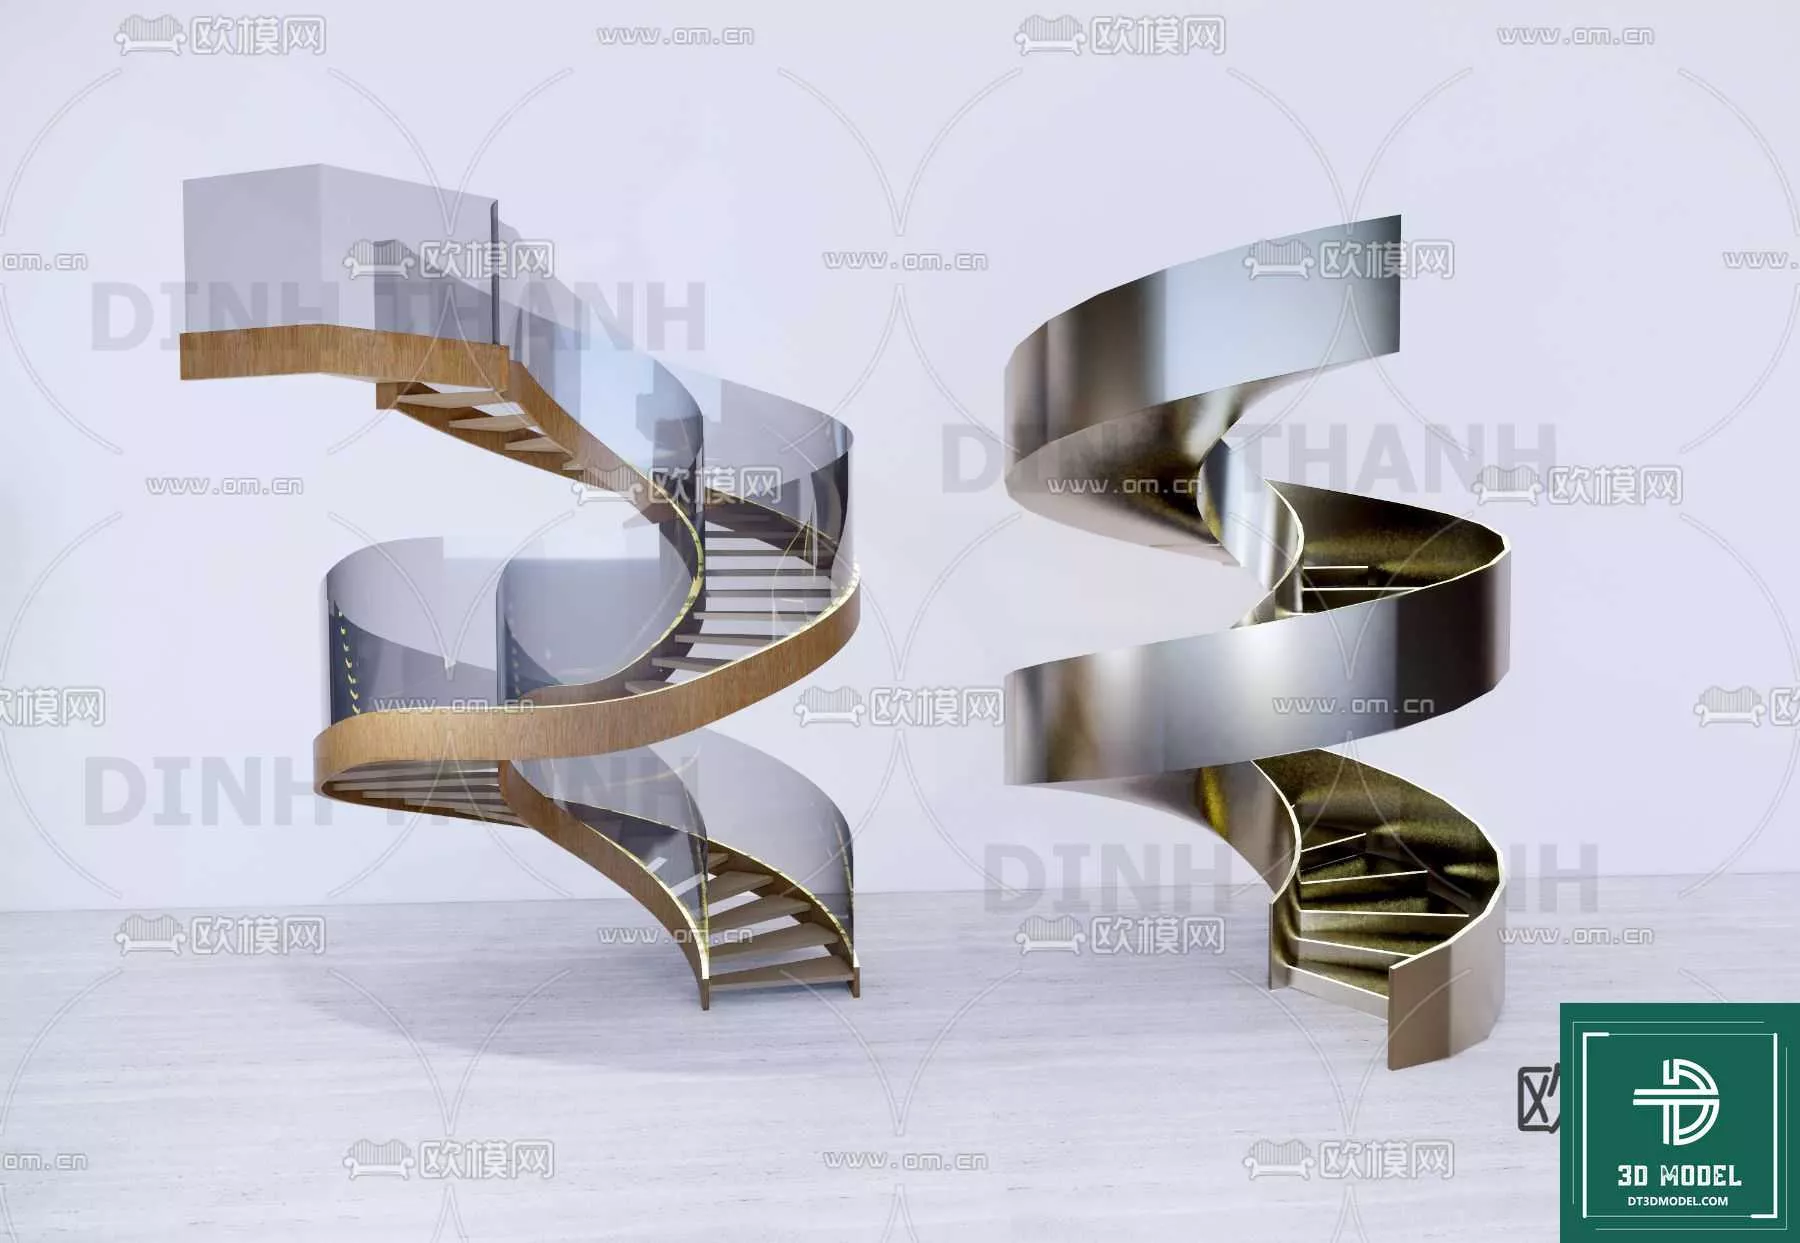 MODERN STAIR - SKETCHUP 3D MODEL - VRAY OR ENSCAPE - ID14248